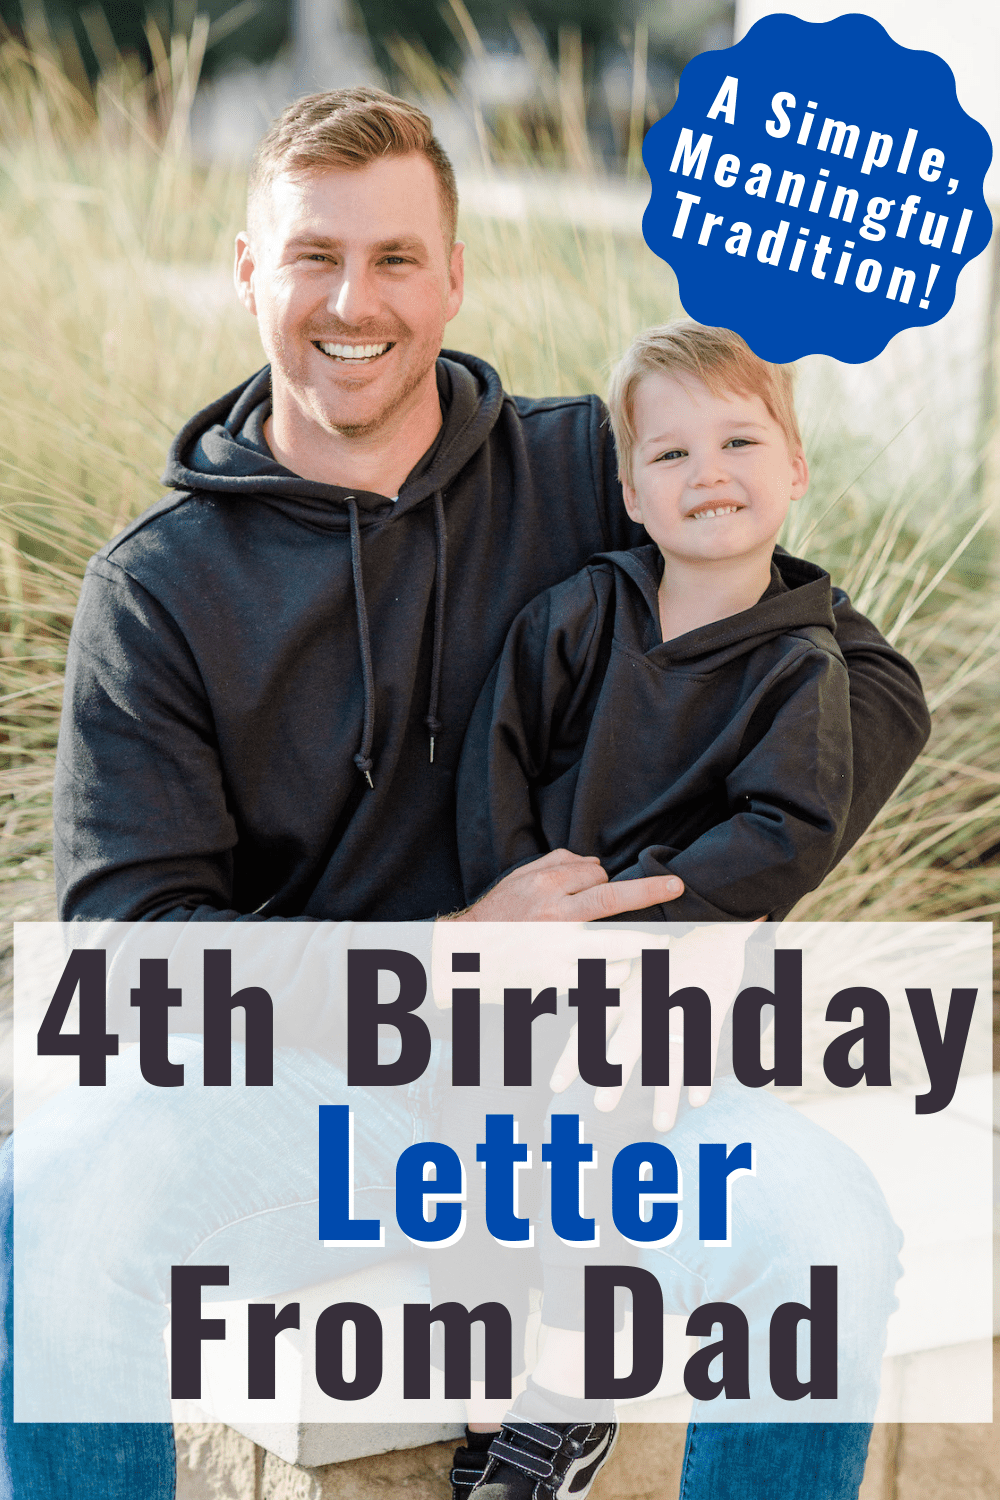 Spear's 4th birthday letter to son from dad - a simple and meaningful birthday tradition to write a happy birthday letter  